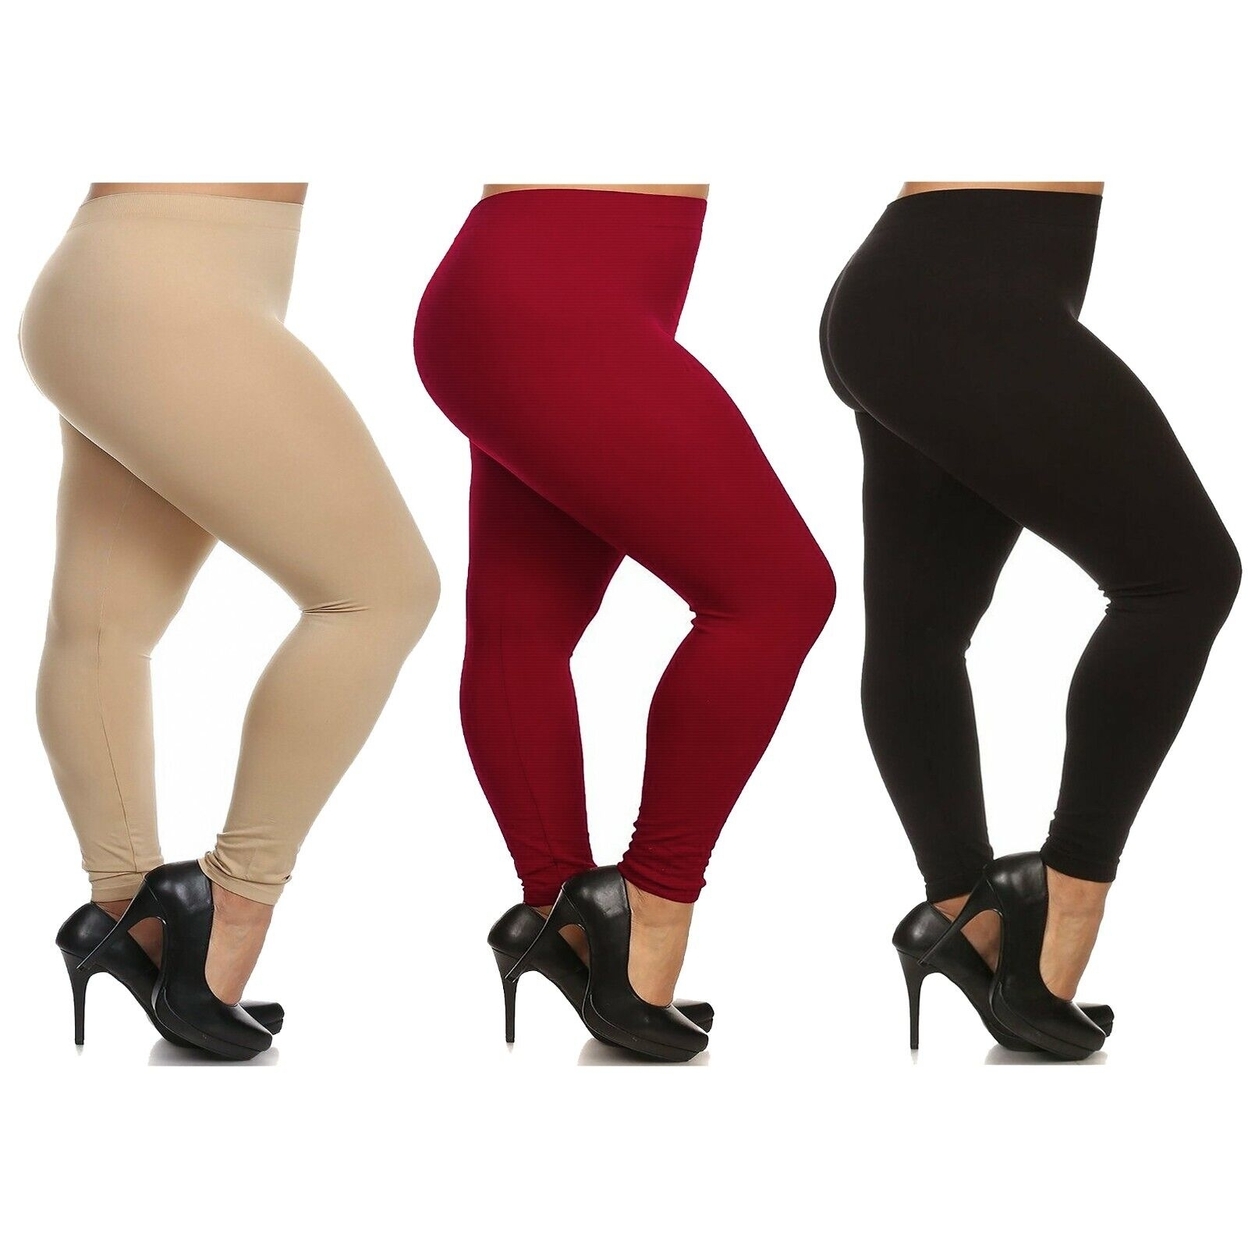 3-Pack: Women's Casual Ultra-Soft Smooth High Waisted Athletic Active Yoga Leggings Plus Size Available - Red,red,red, 2x